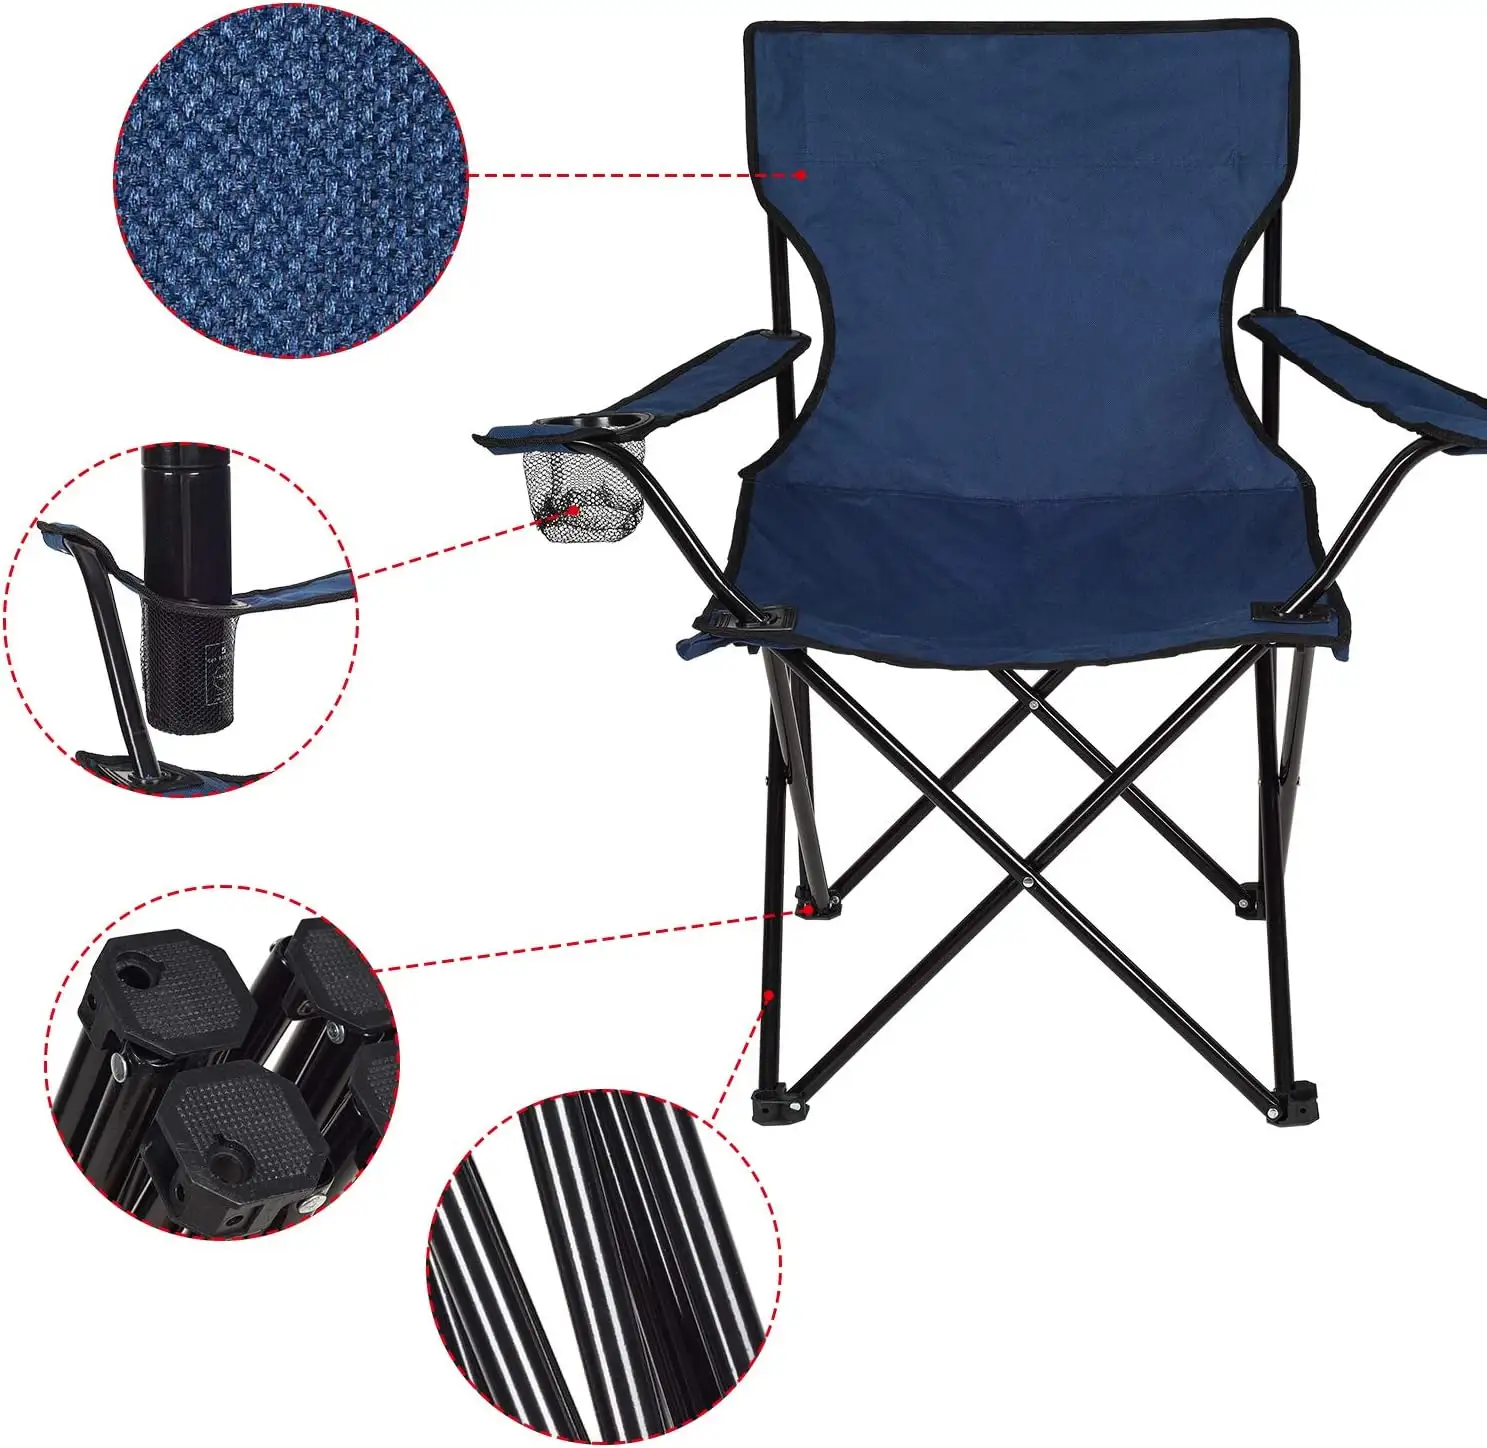 Lightweight Outdoor Camping Chairs Folding Portable Folding Chair Camping Beach Chair Foldable